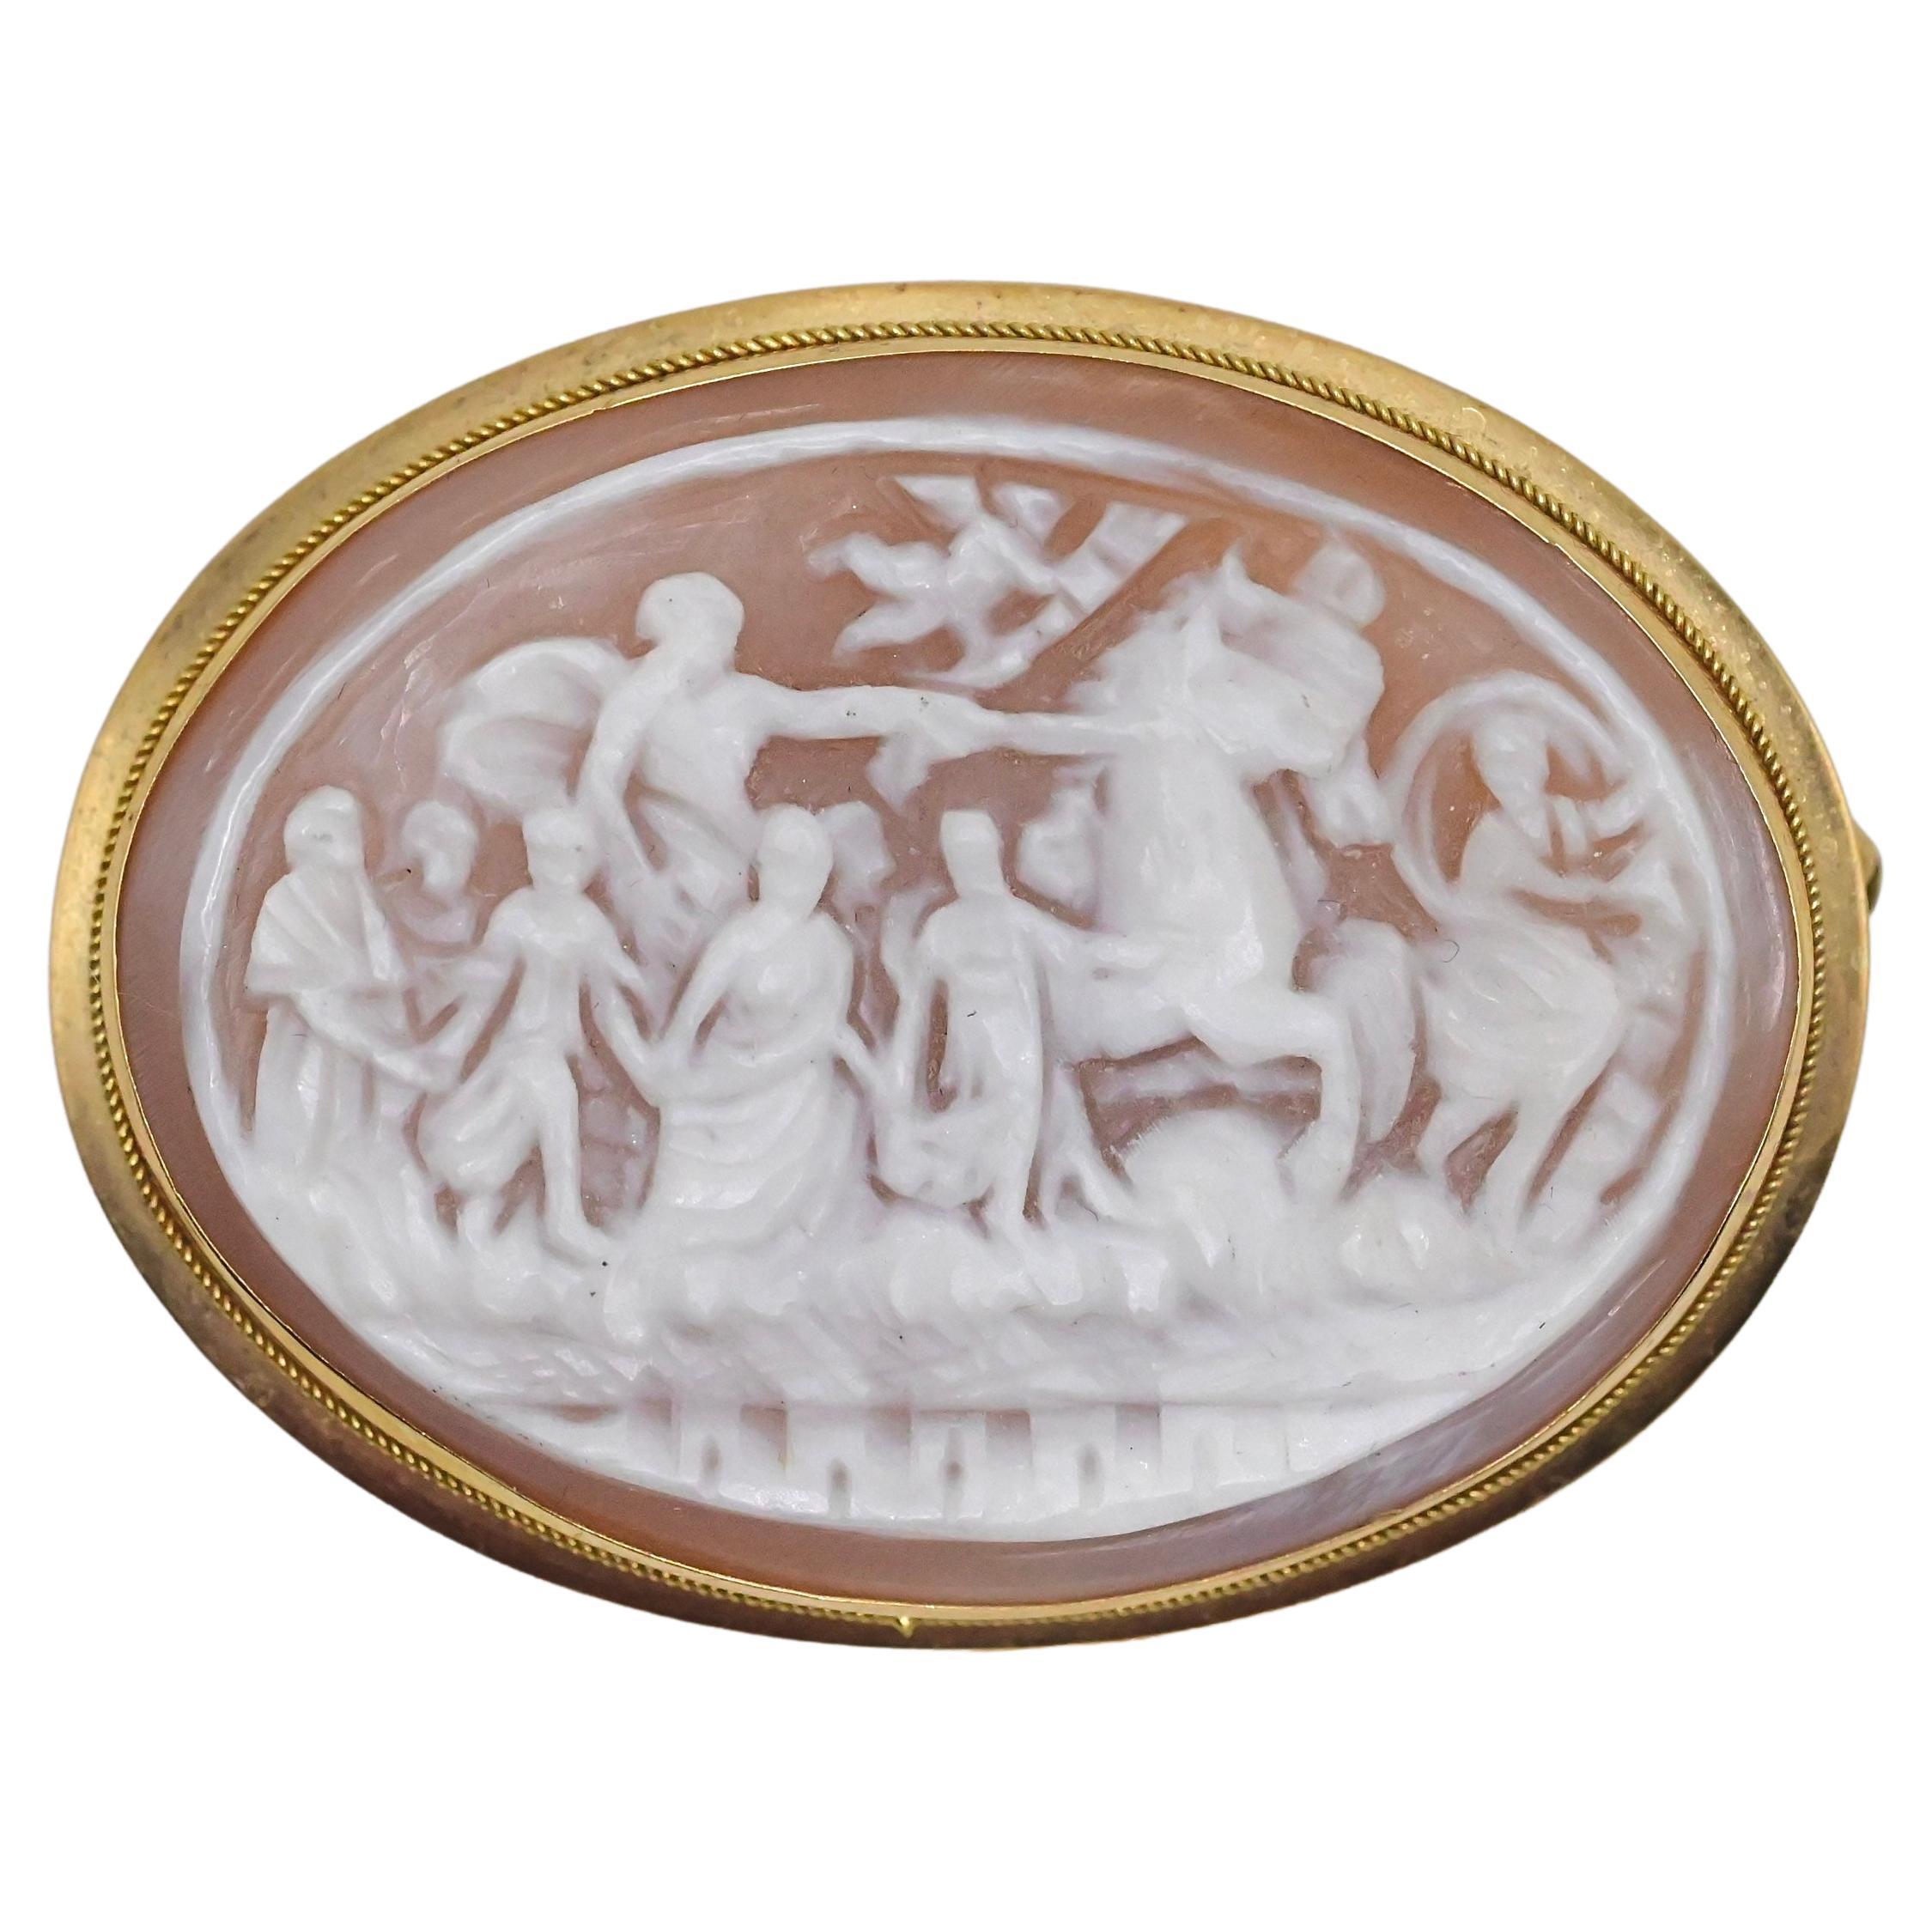 Intricate Carved Shell Cameo Gold Brooch